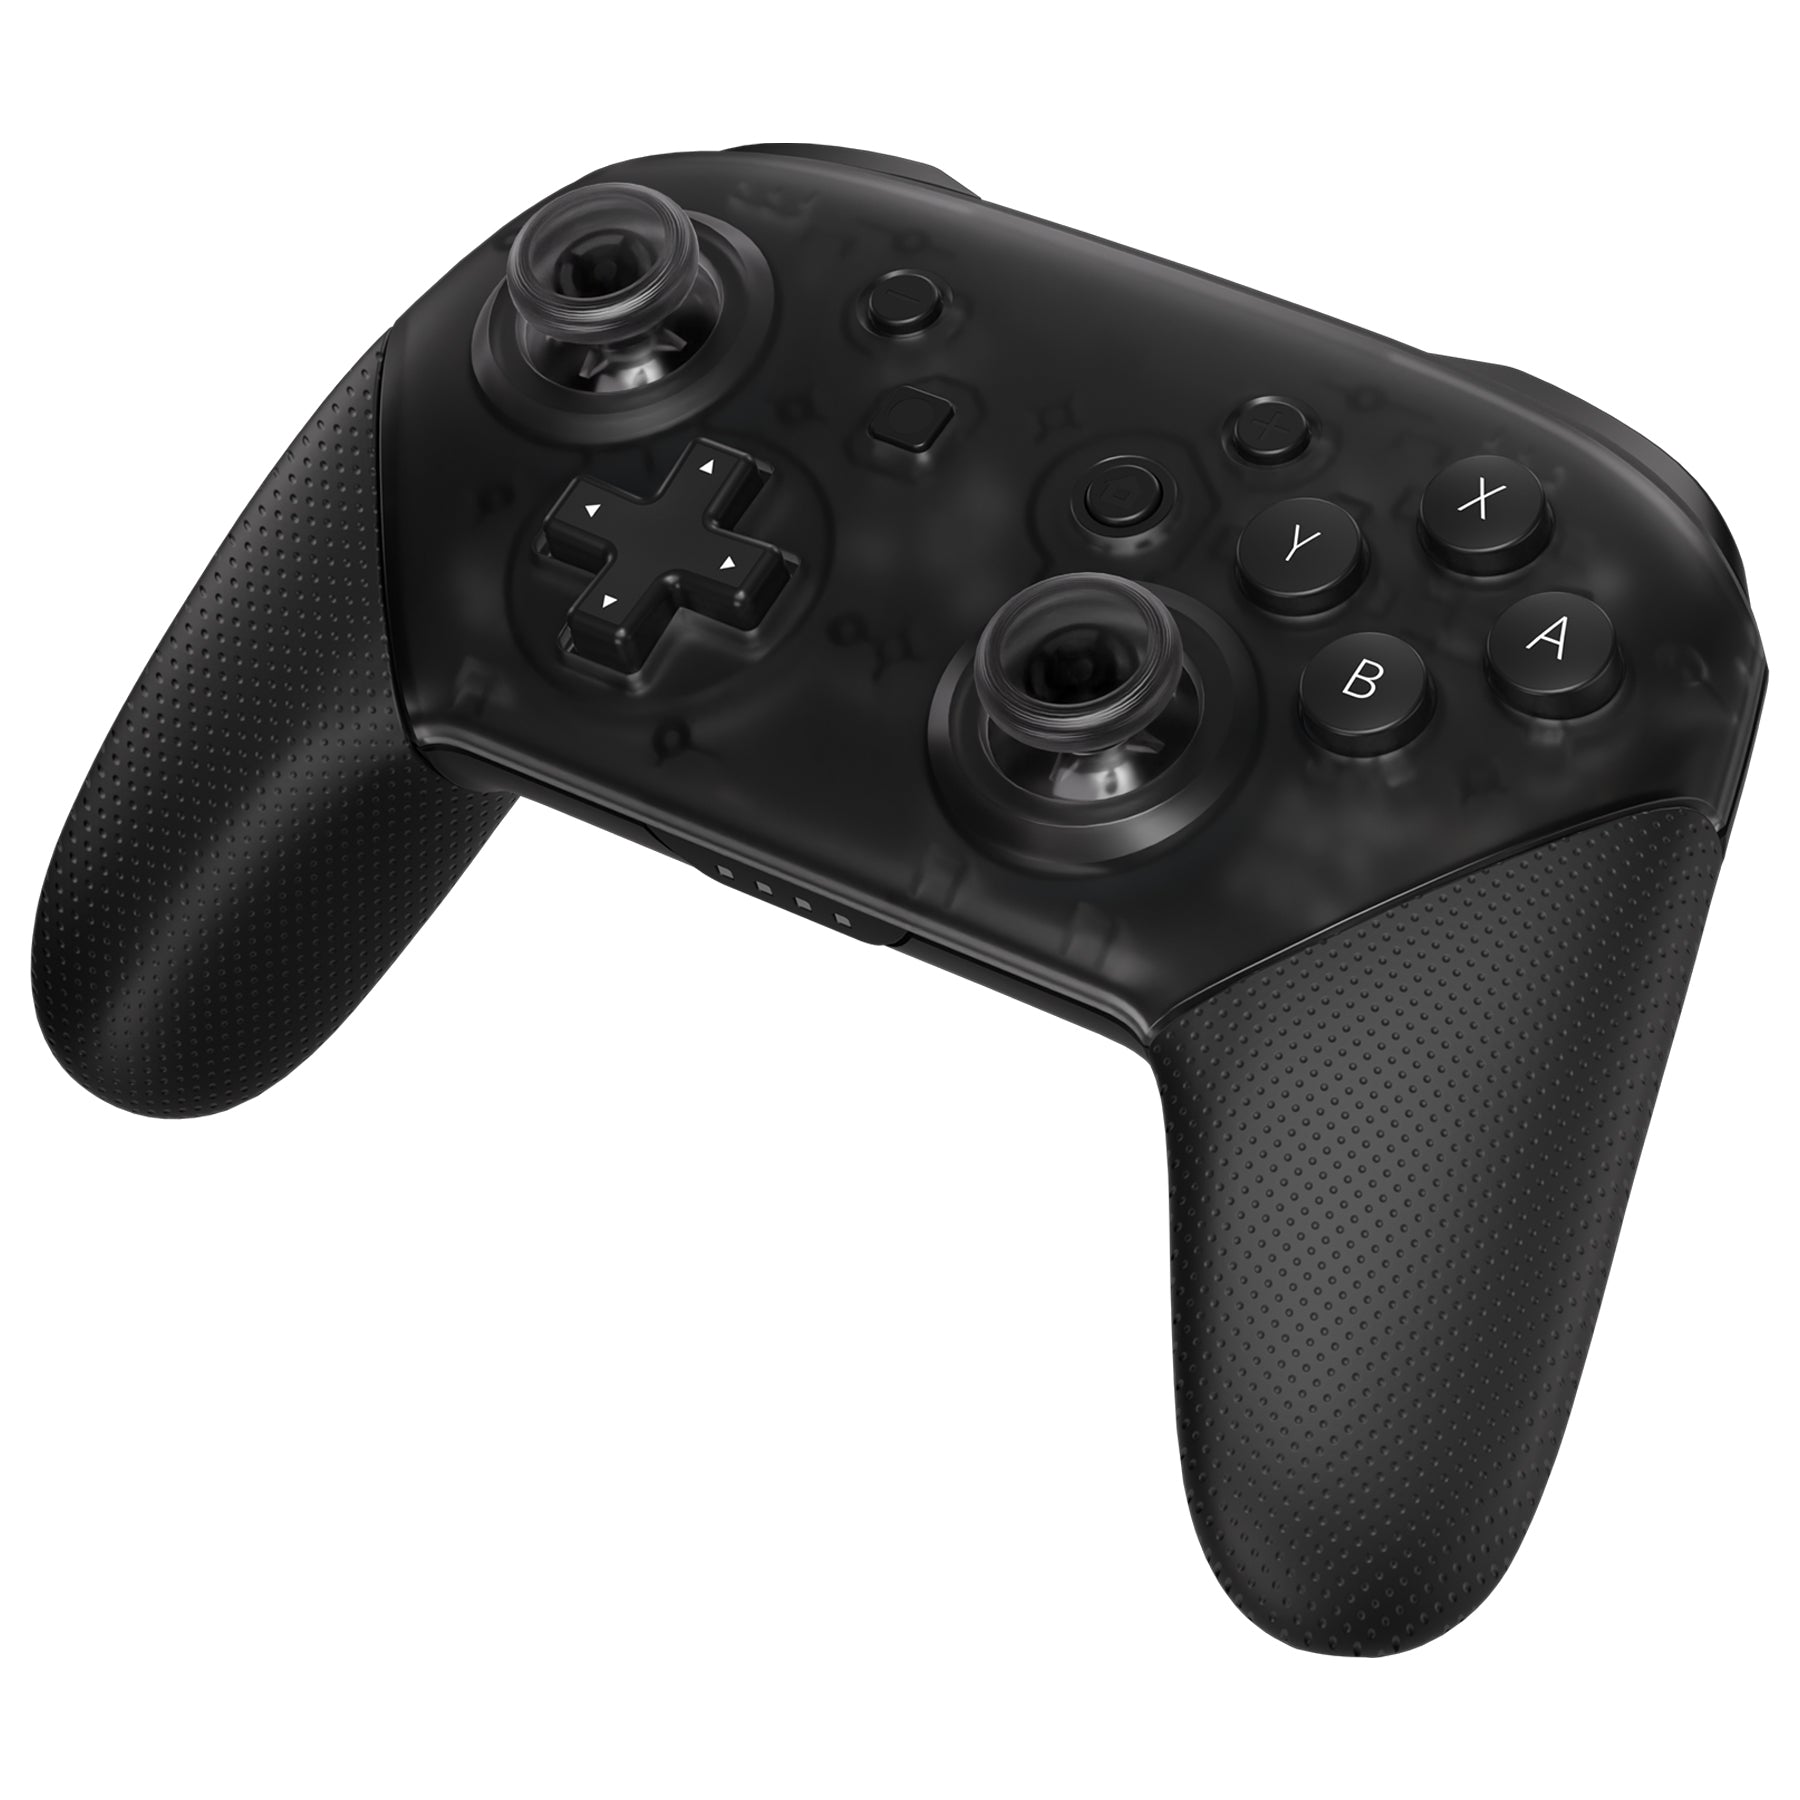 Replacement 3D Analog Joystick Thumbsticks for Nintendo Switch Pro Controller - Clear Black eXtremeRate